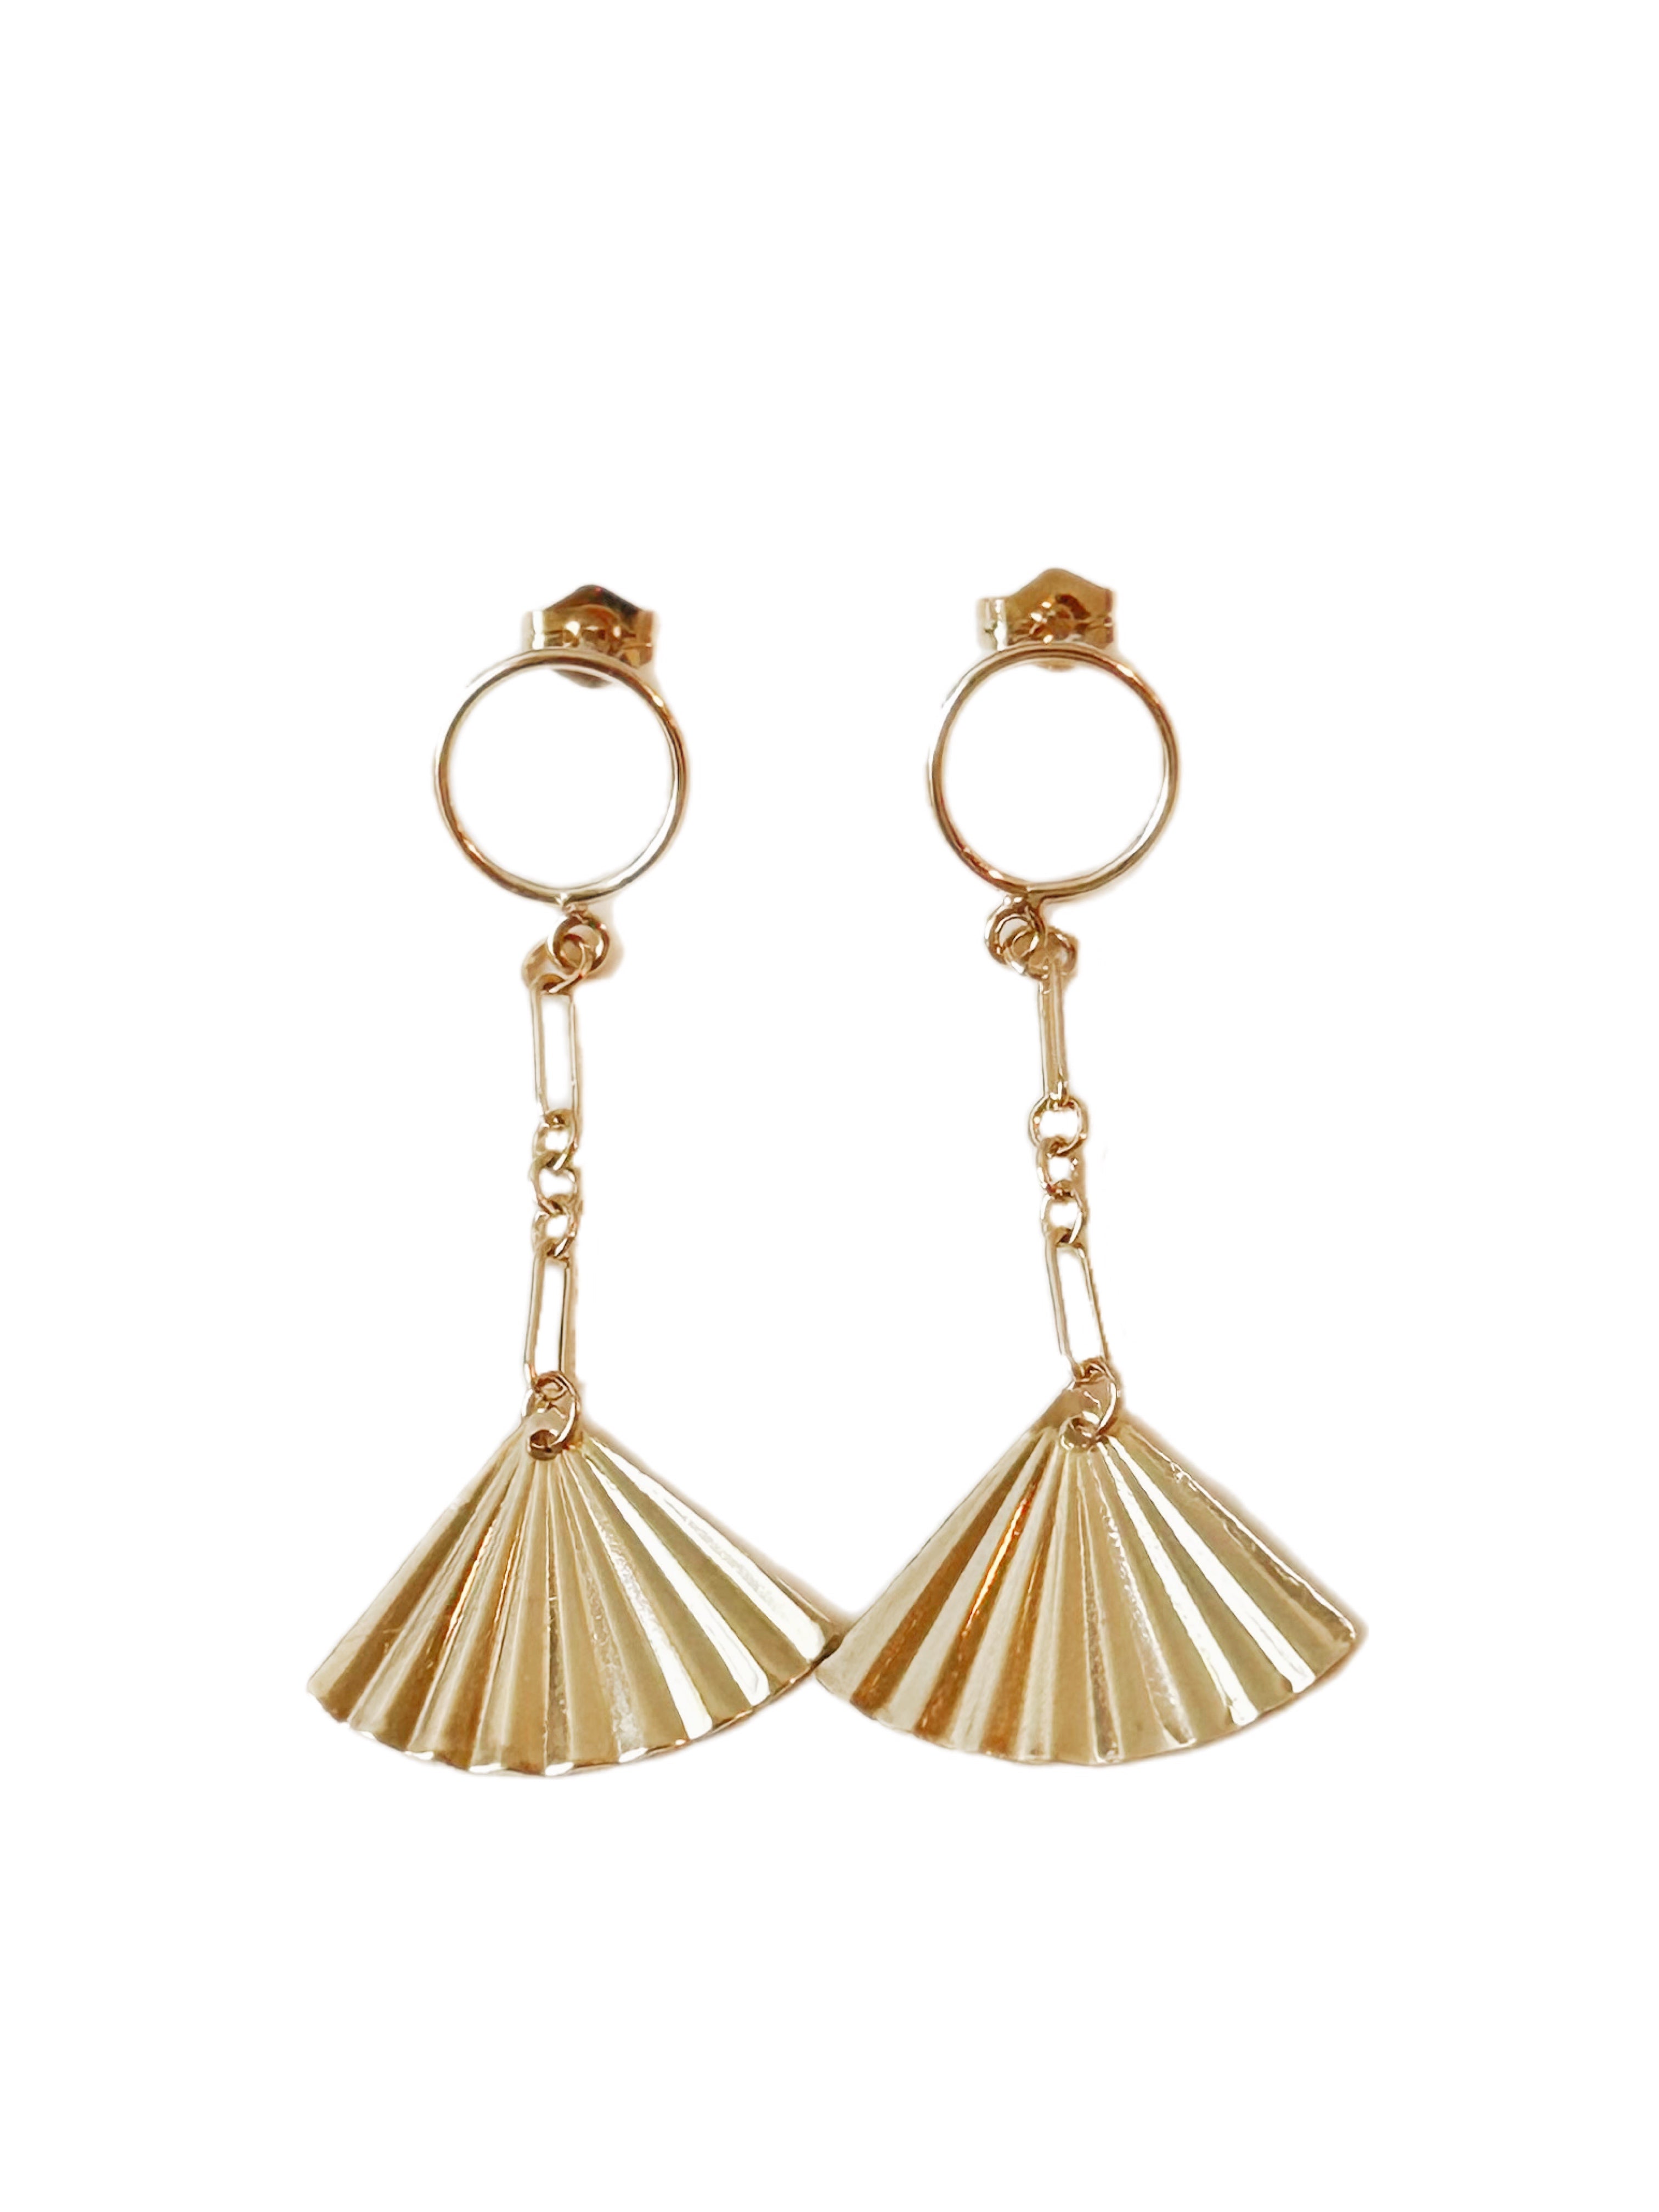 Triton - gold-filled stud earrings with fan accent